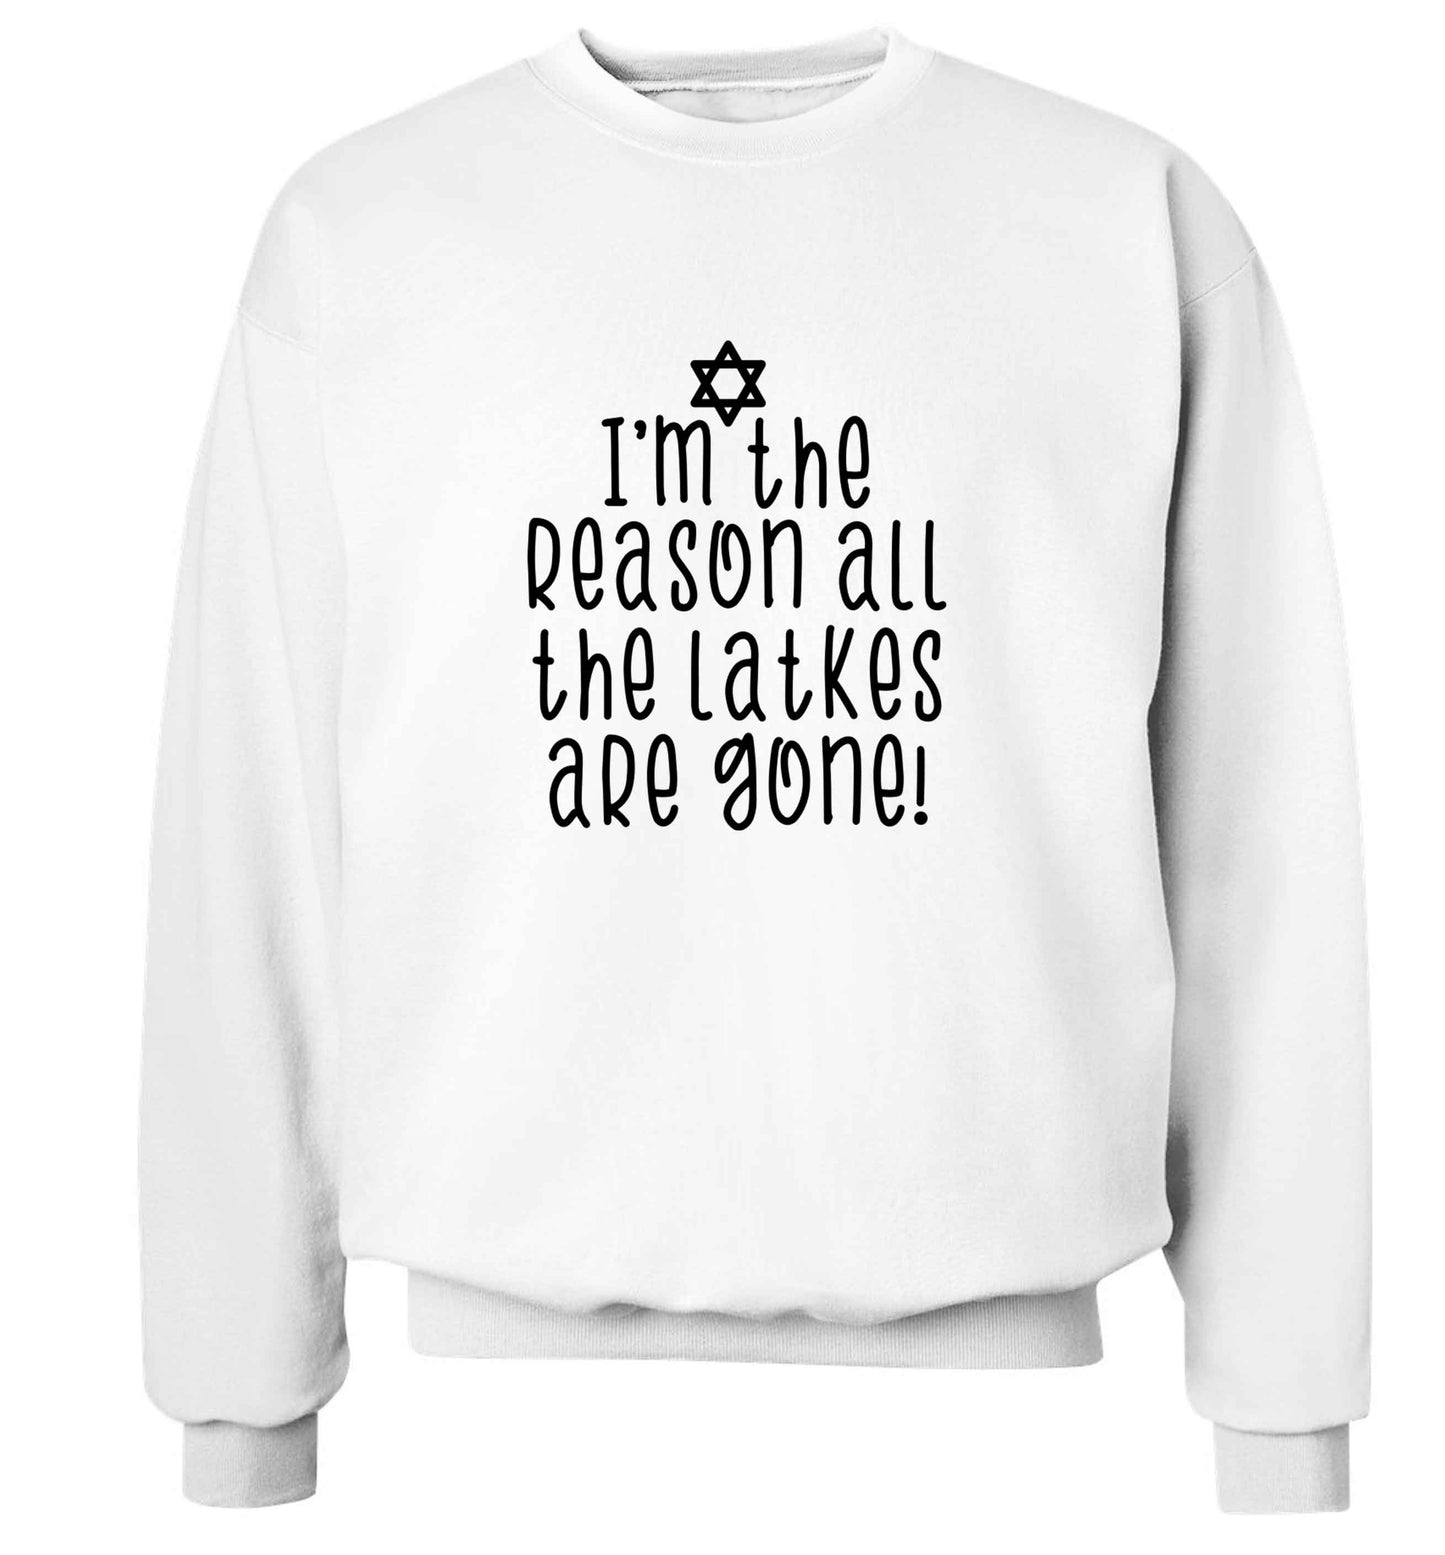 I'm the reason all the latkes are gone adult's unisex white sweater 2XL